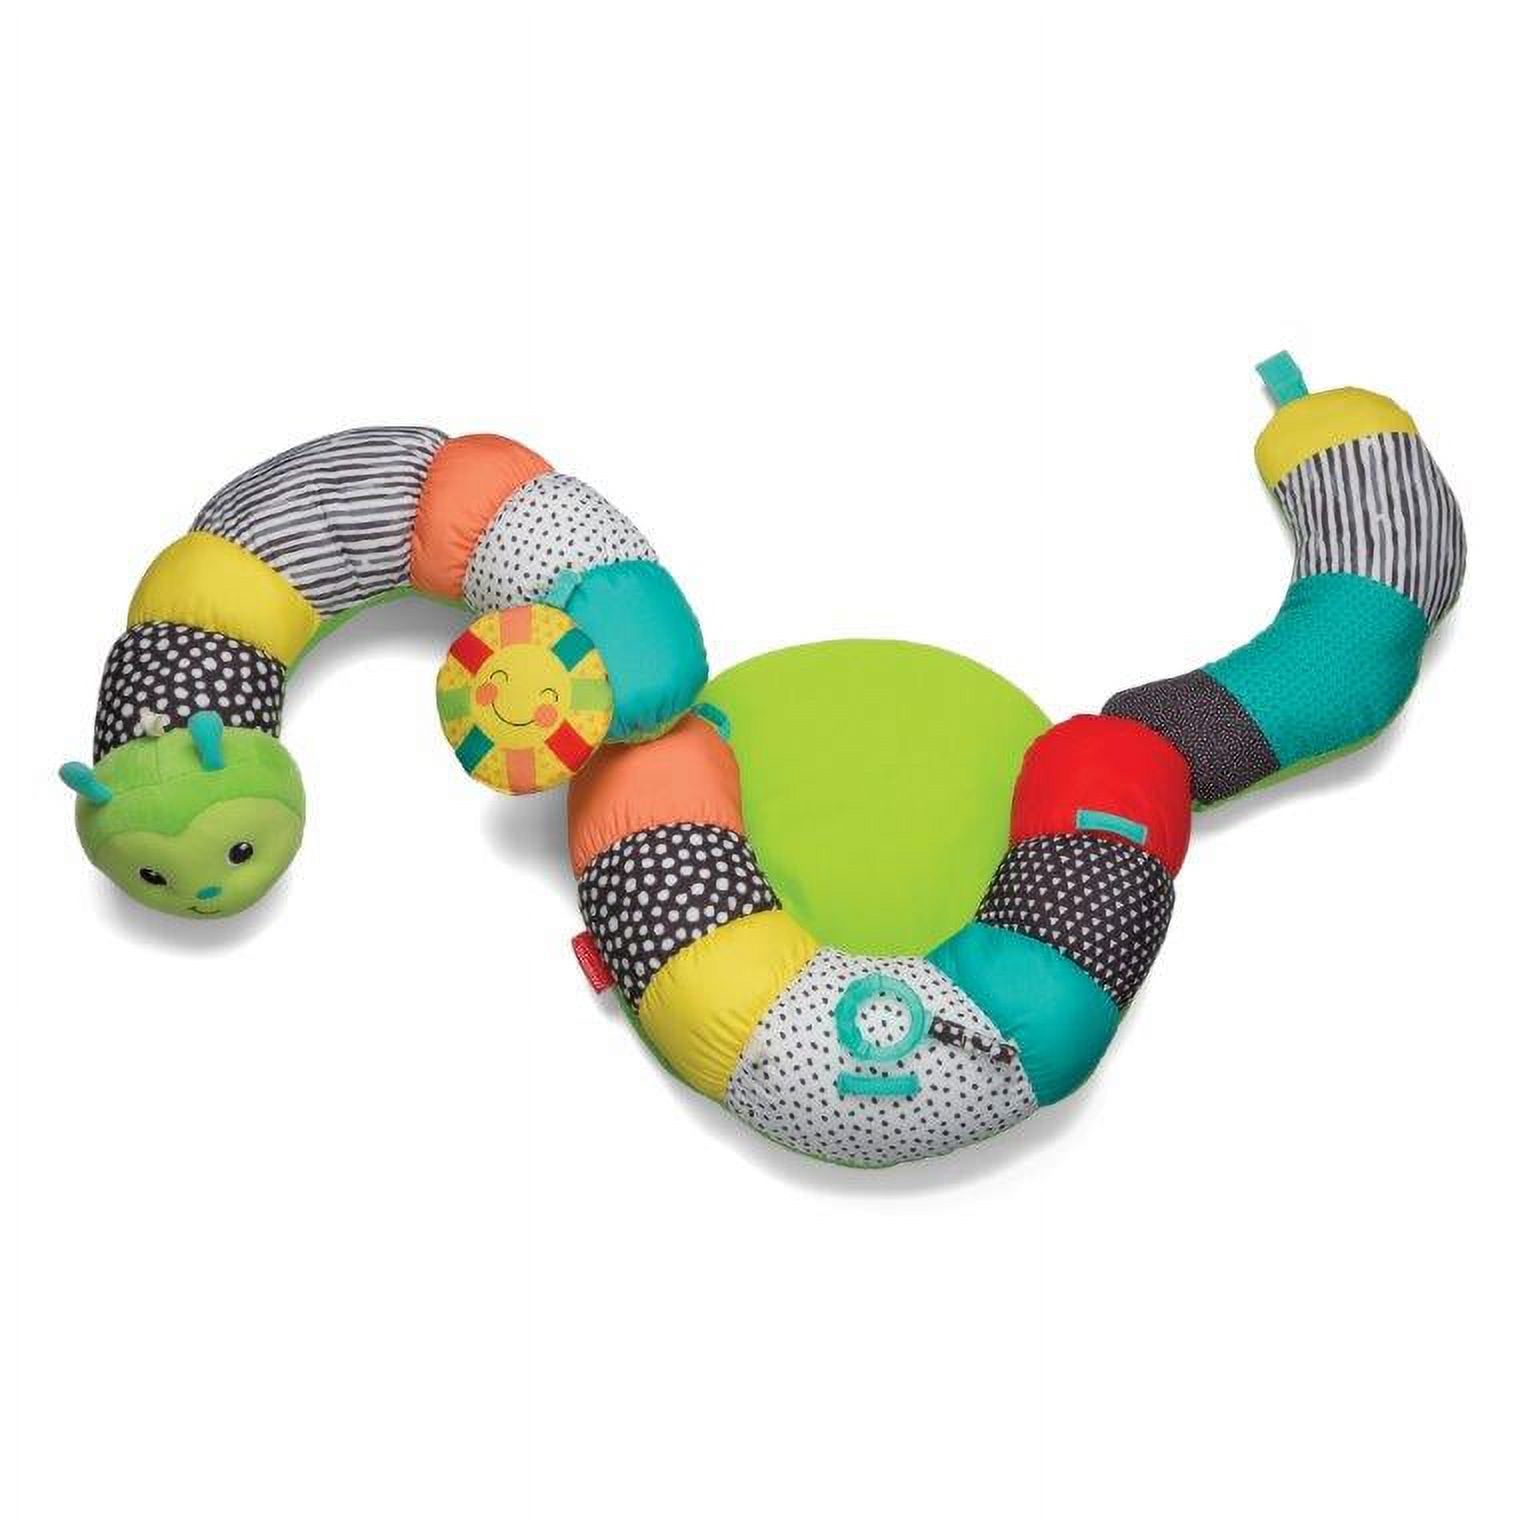 Infantino Prop-A-Pillar Tummy Time & Seated Support - image 4 of 8